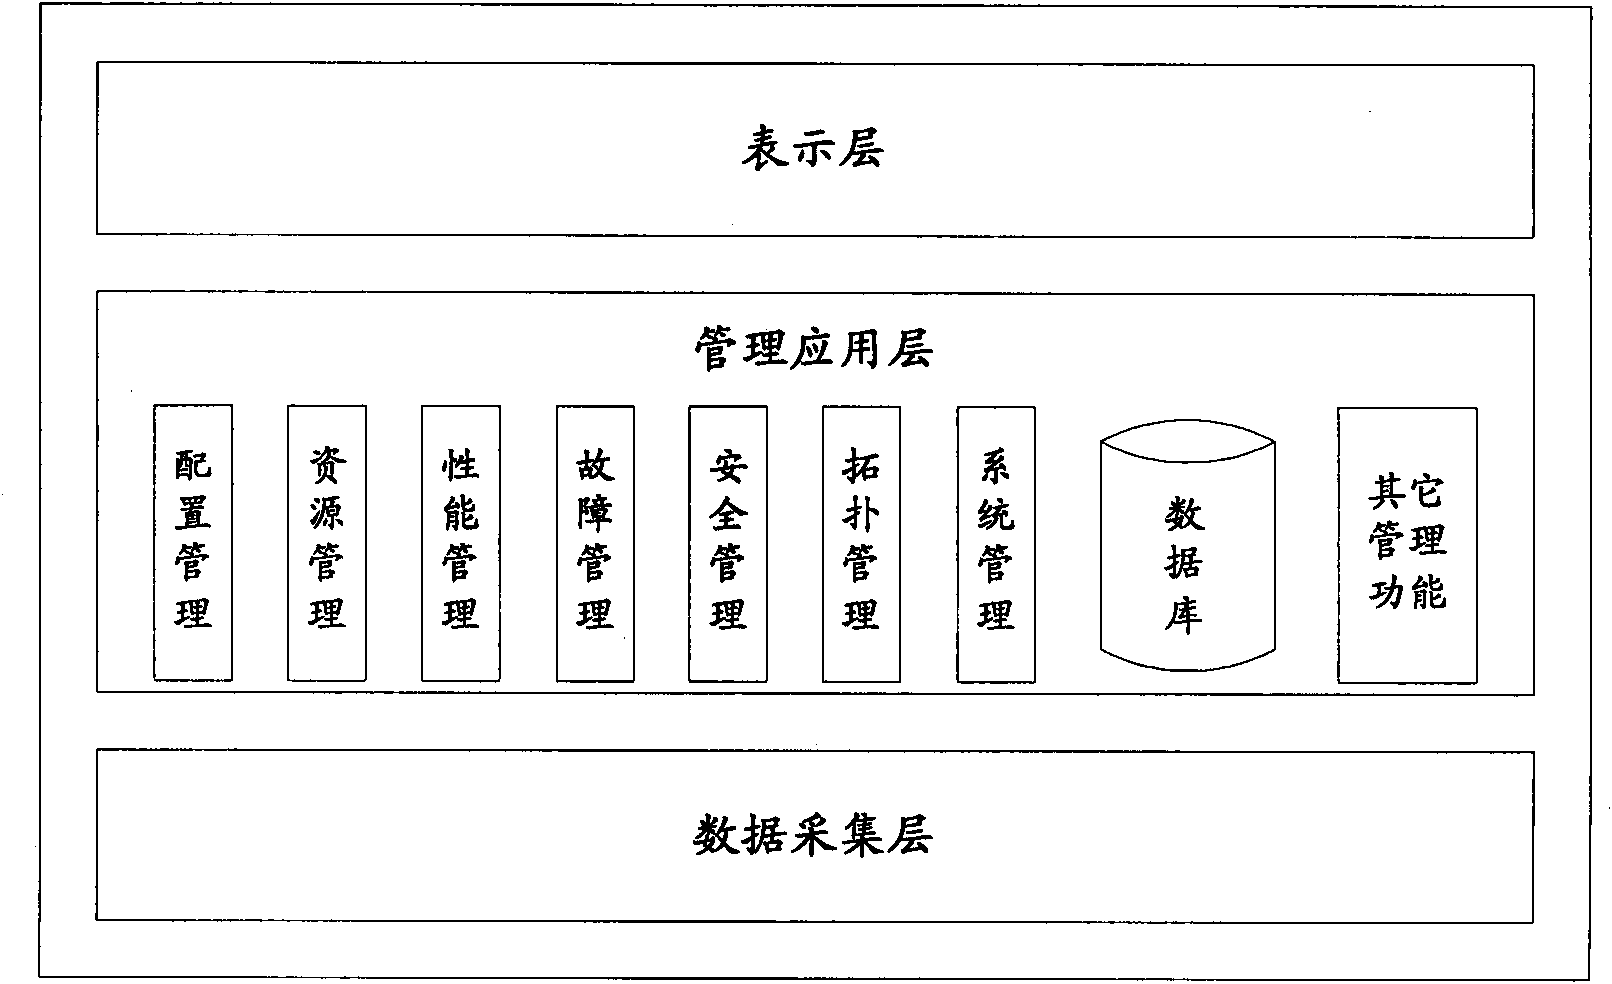 Method for monitoring quality of link between HNB (Home Node Base station) and HNB GW (Home Node Gateway) as well as system thereof